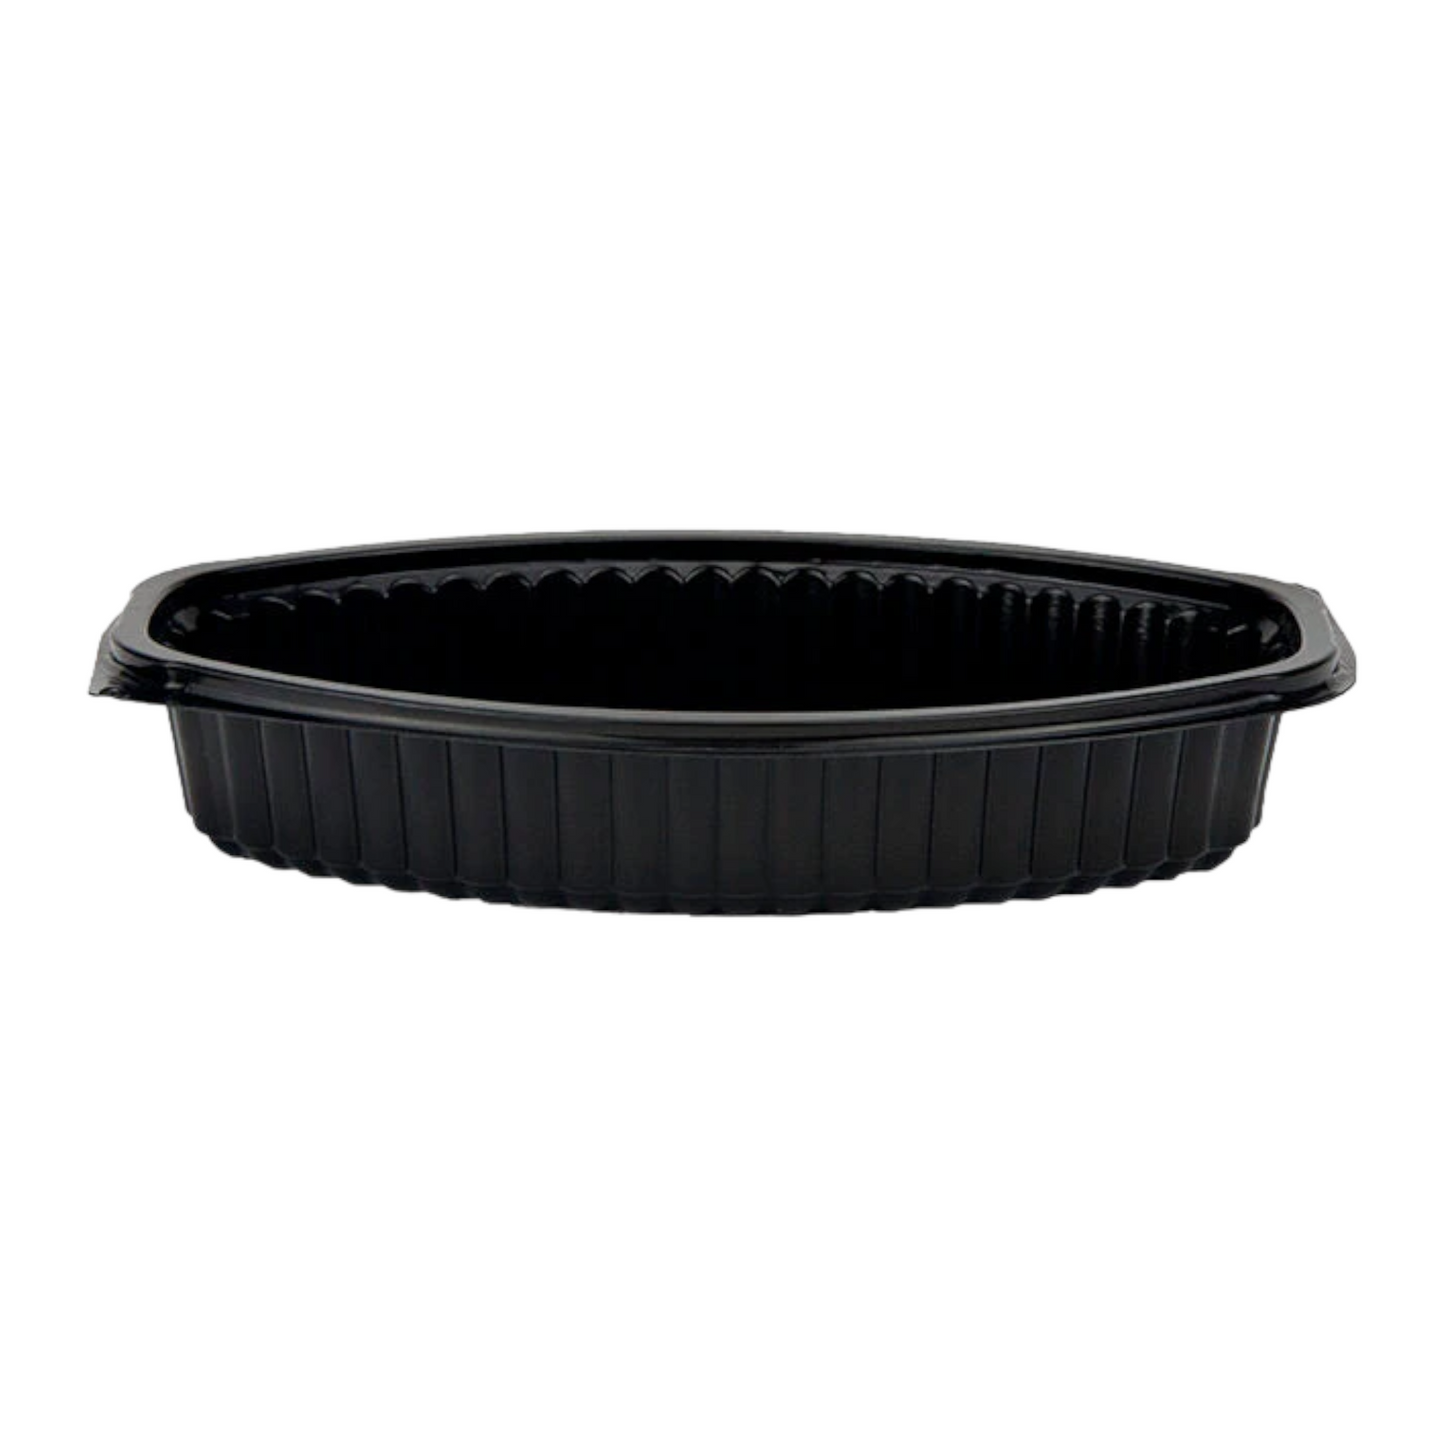 Mani [M-7000 PP] 12oz Oval Microwave Container (Base)